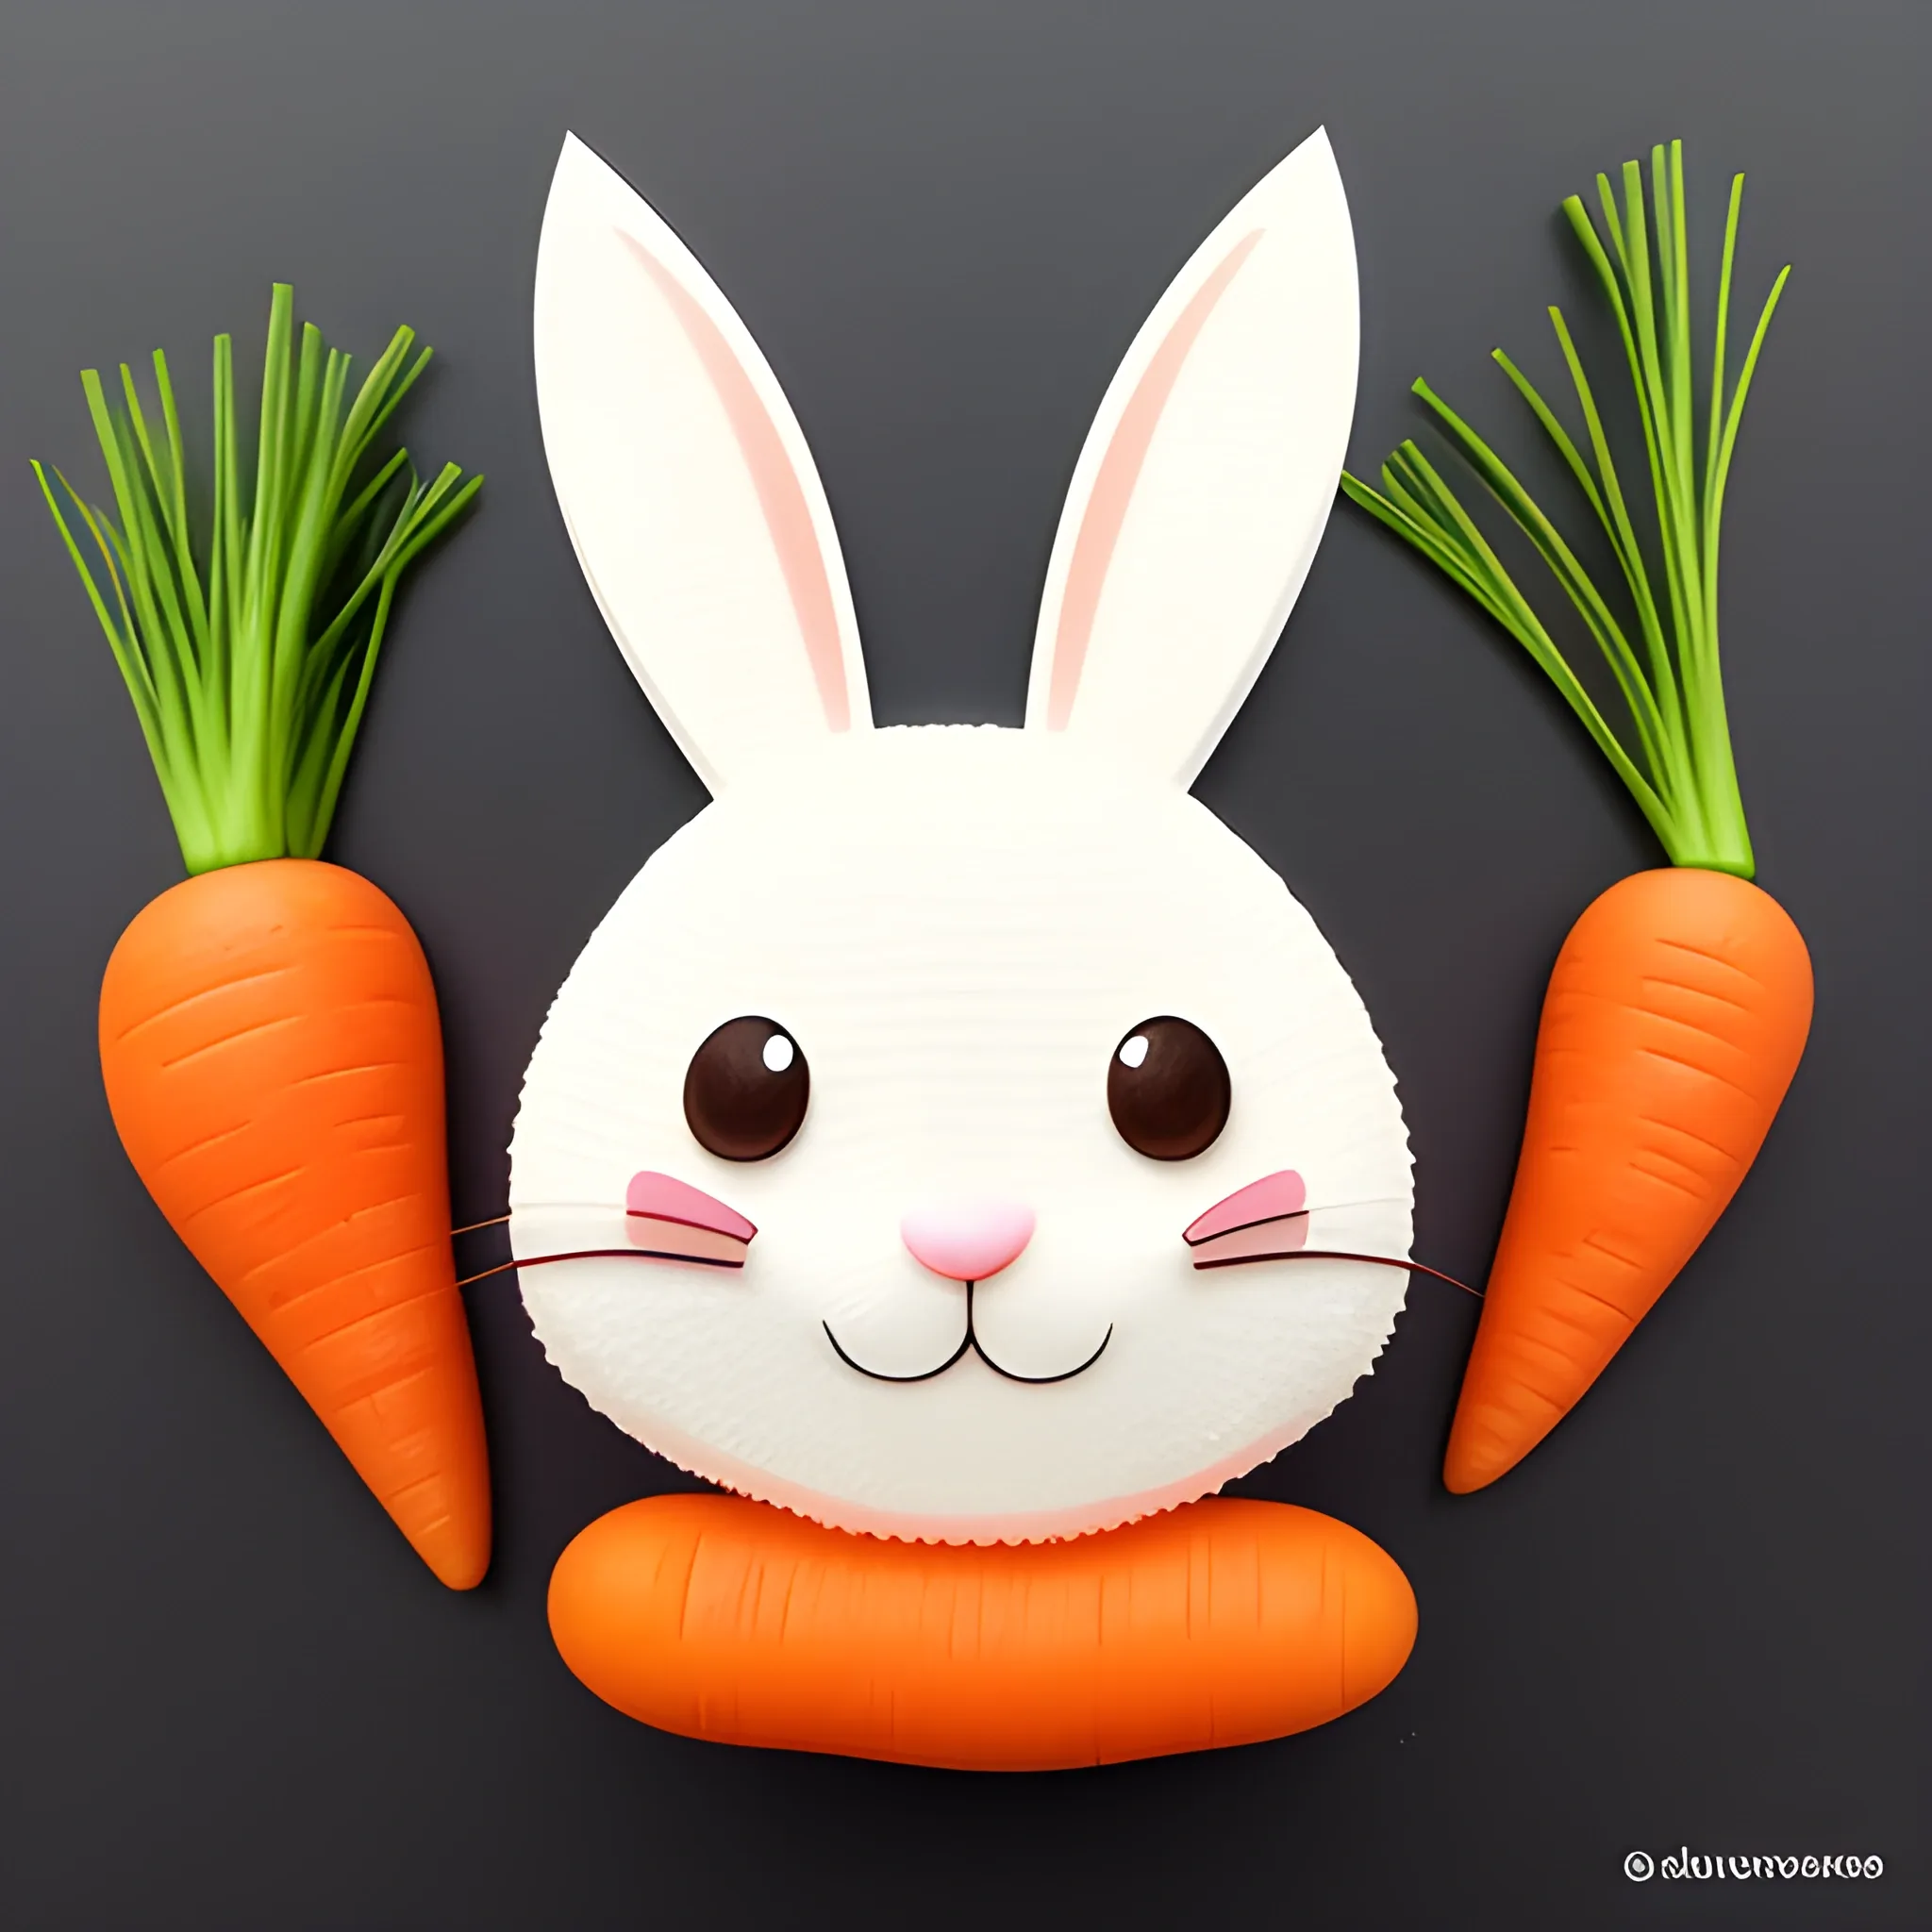 Create a cute smiling rabbit for a little girl, with carrots and Cartoon style